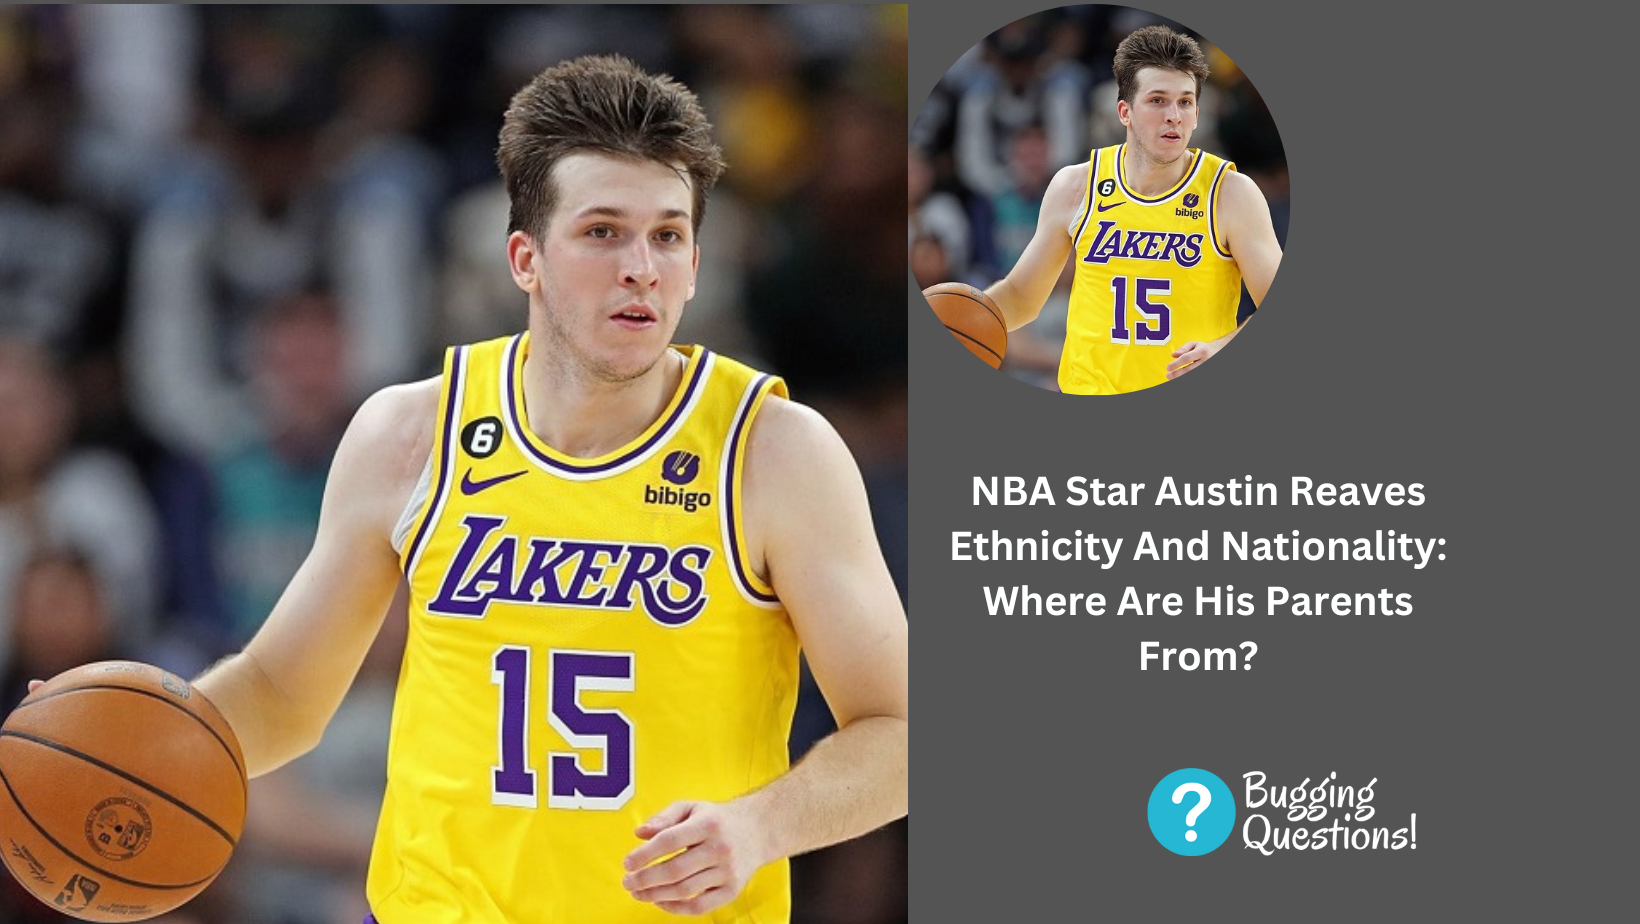 NBA Star Austin Reaves Ethnicity And Nationality: Where Are His Parents From?